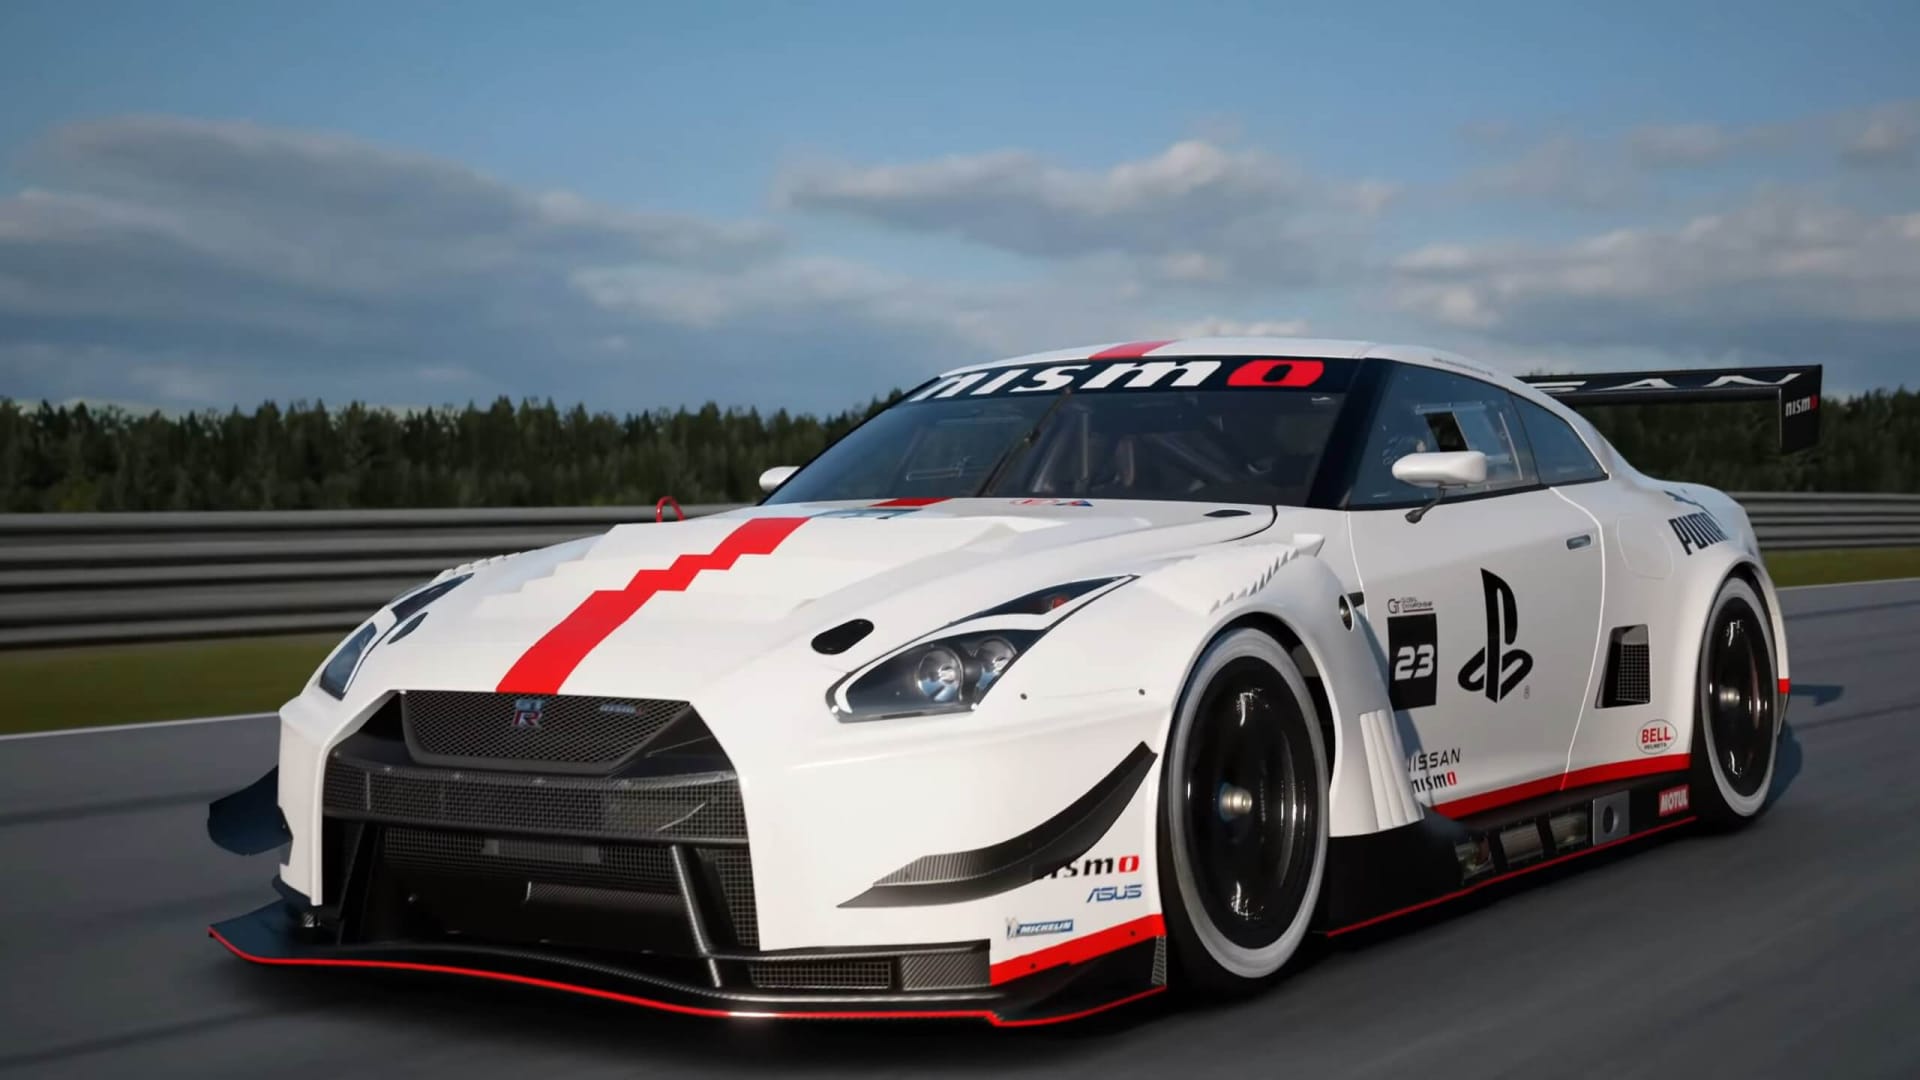 Gran Turismo 7' comes to PS4 and PS5 on March 4th, 2022